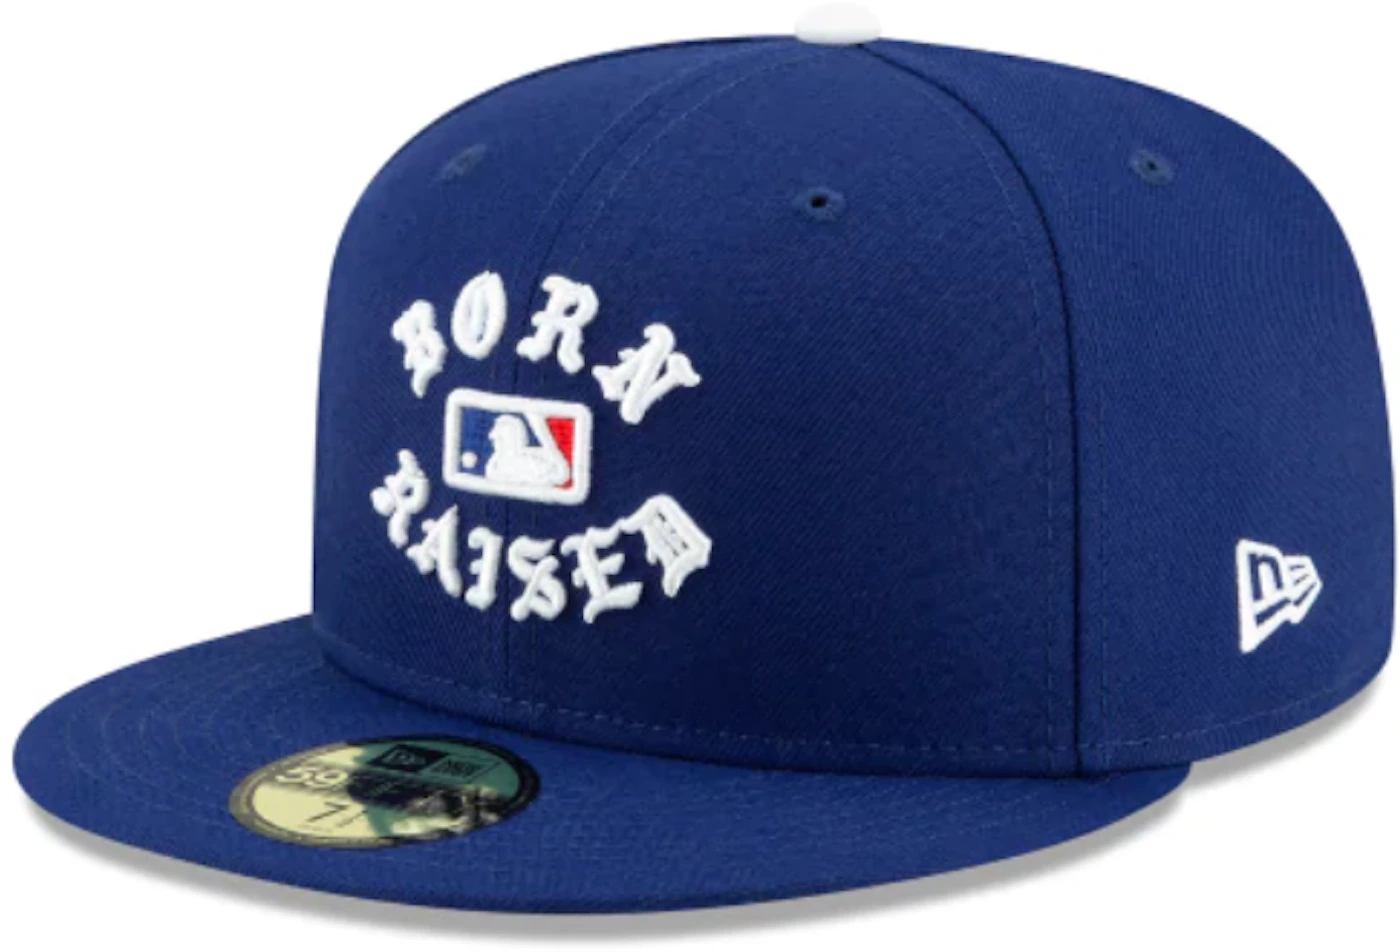 Born X Raised Los Angeles Dodgers MLB Fitted Hat Blue Men's - FW19